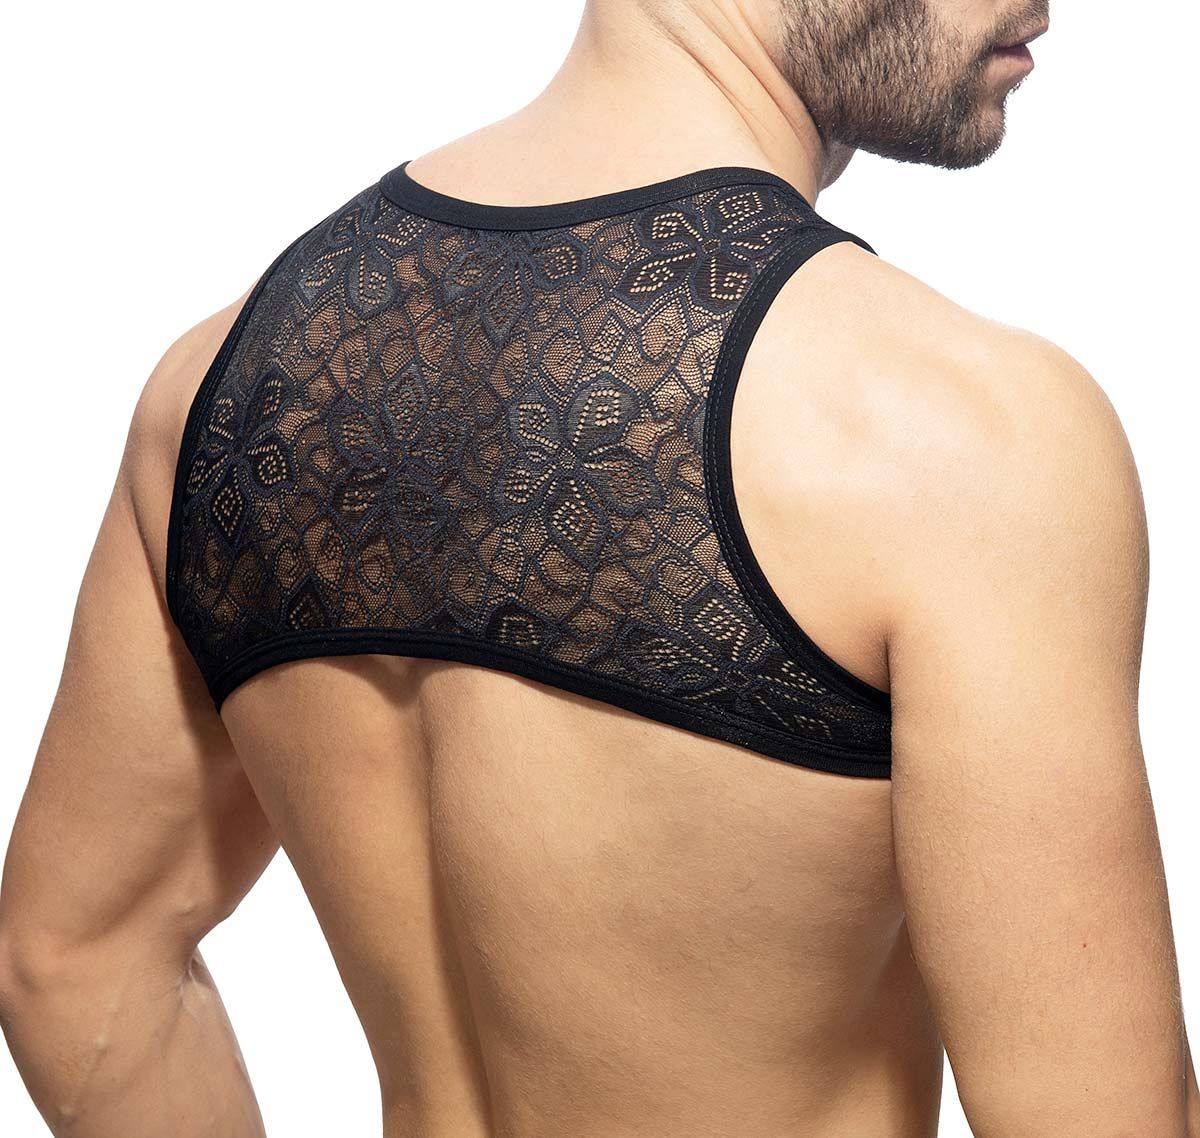 Addicted Harness FLOWERY LACE HARNESS AD1173, schwarz